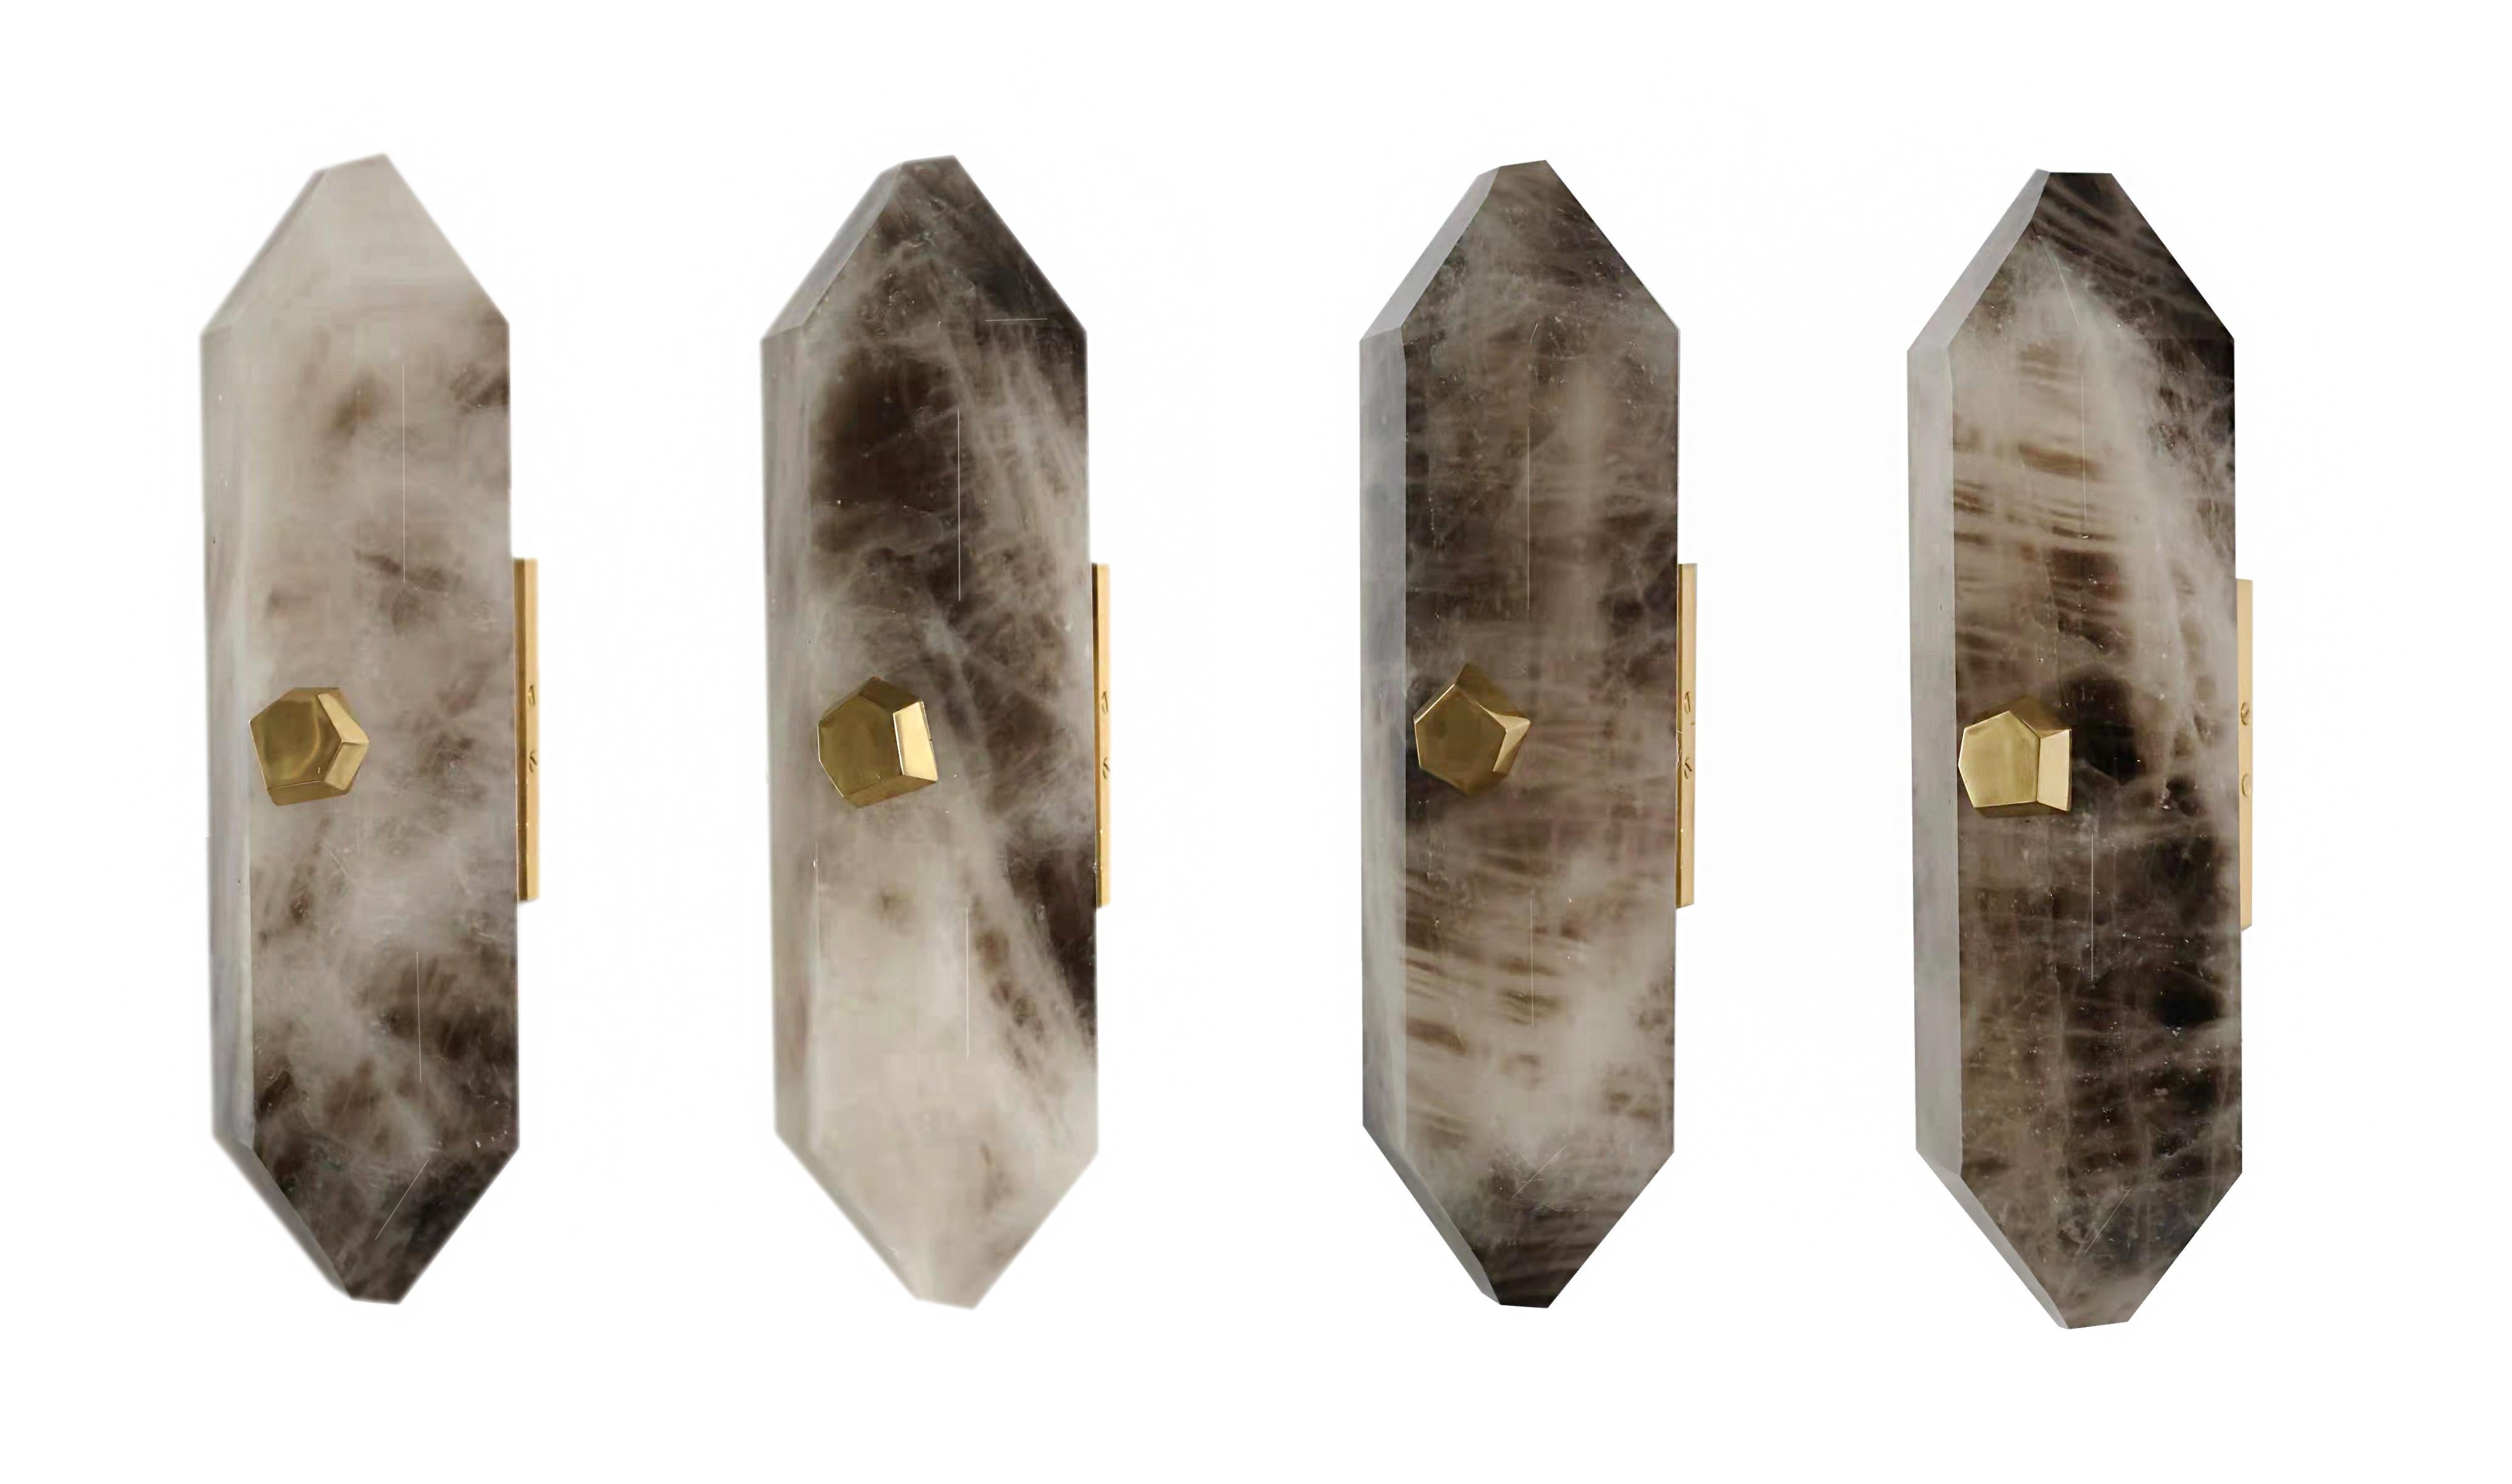 Group of four smokey diamond form rock crystal sconces with polished brass mounts. Each wall sconce installed two sockets, 60 watts max each socket, total 120-watt. Created by Phoenix Gallery NYC.
Custom size, finish, and quantity upon request.